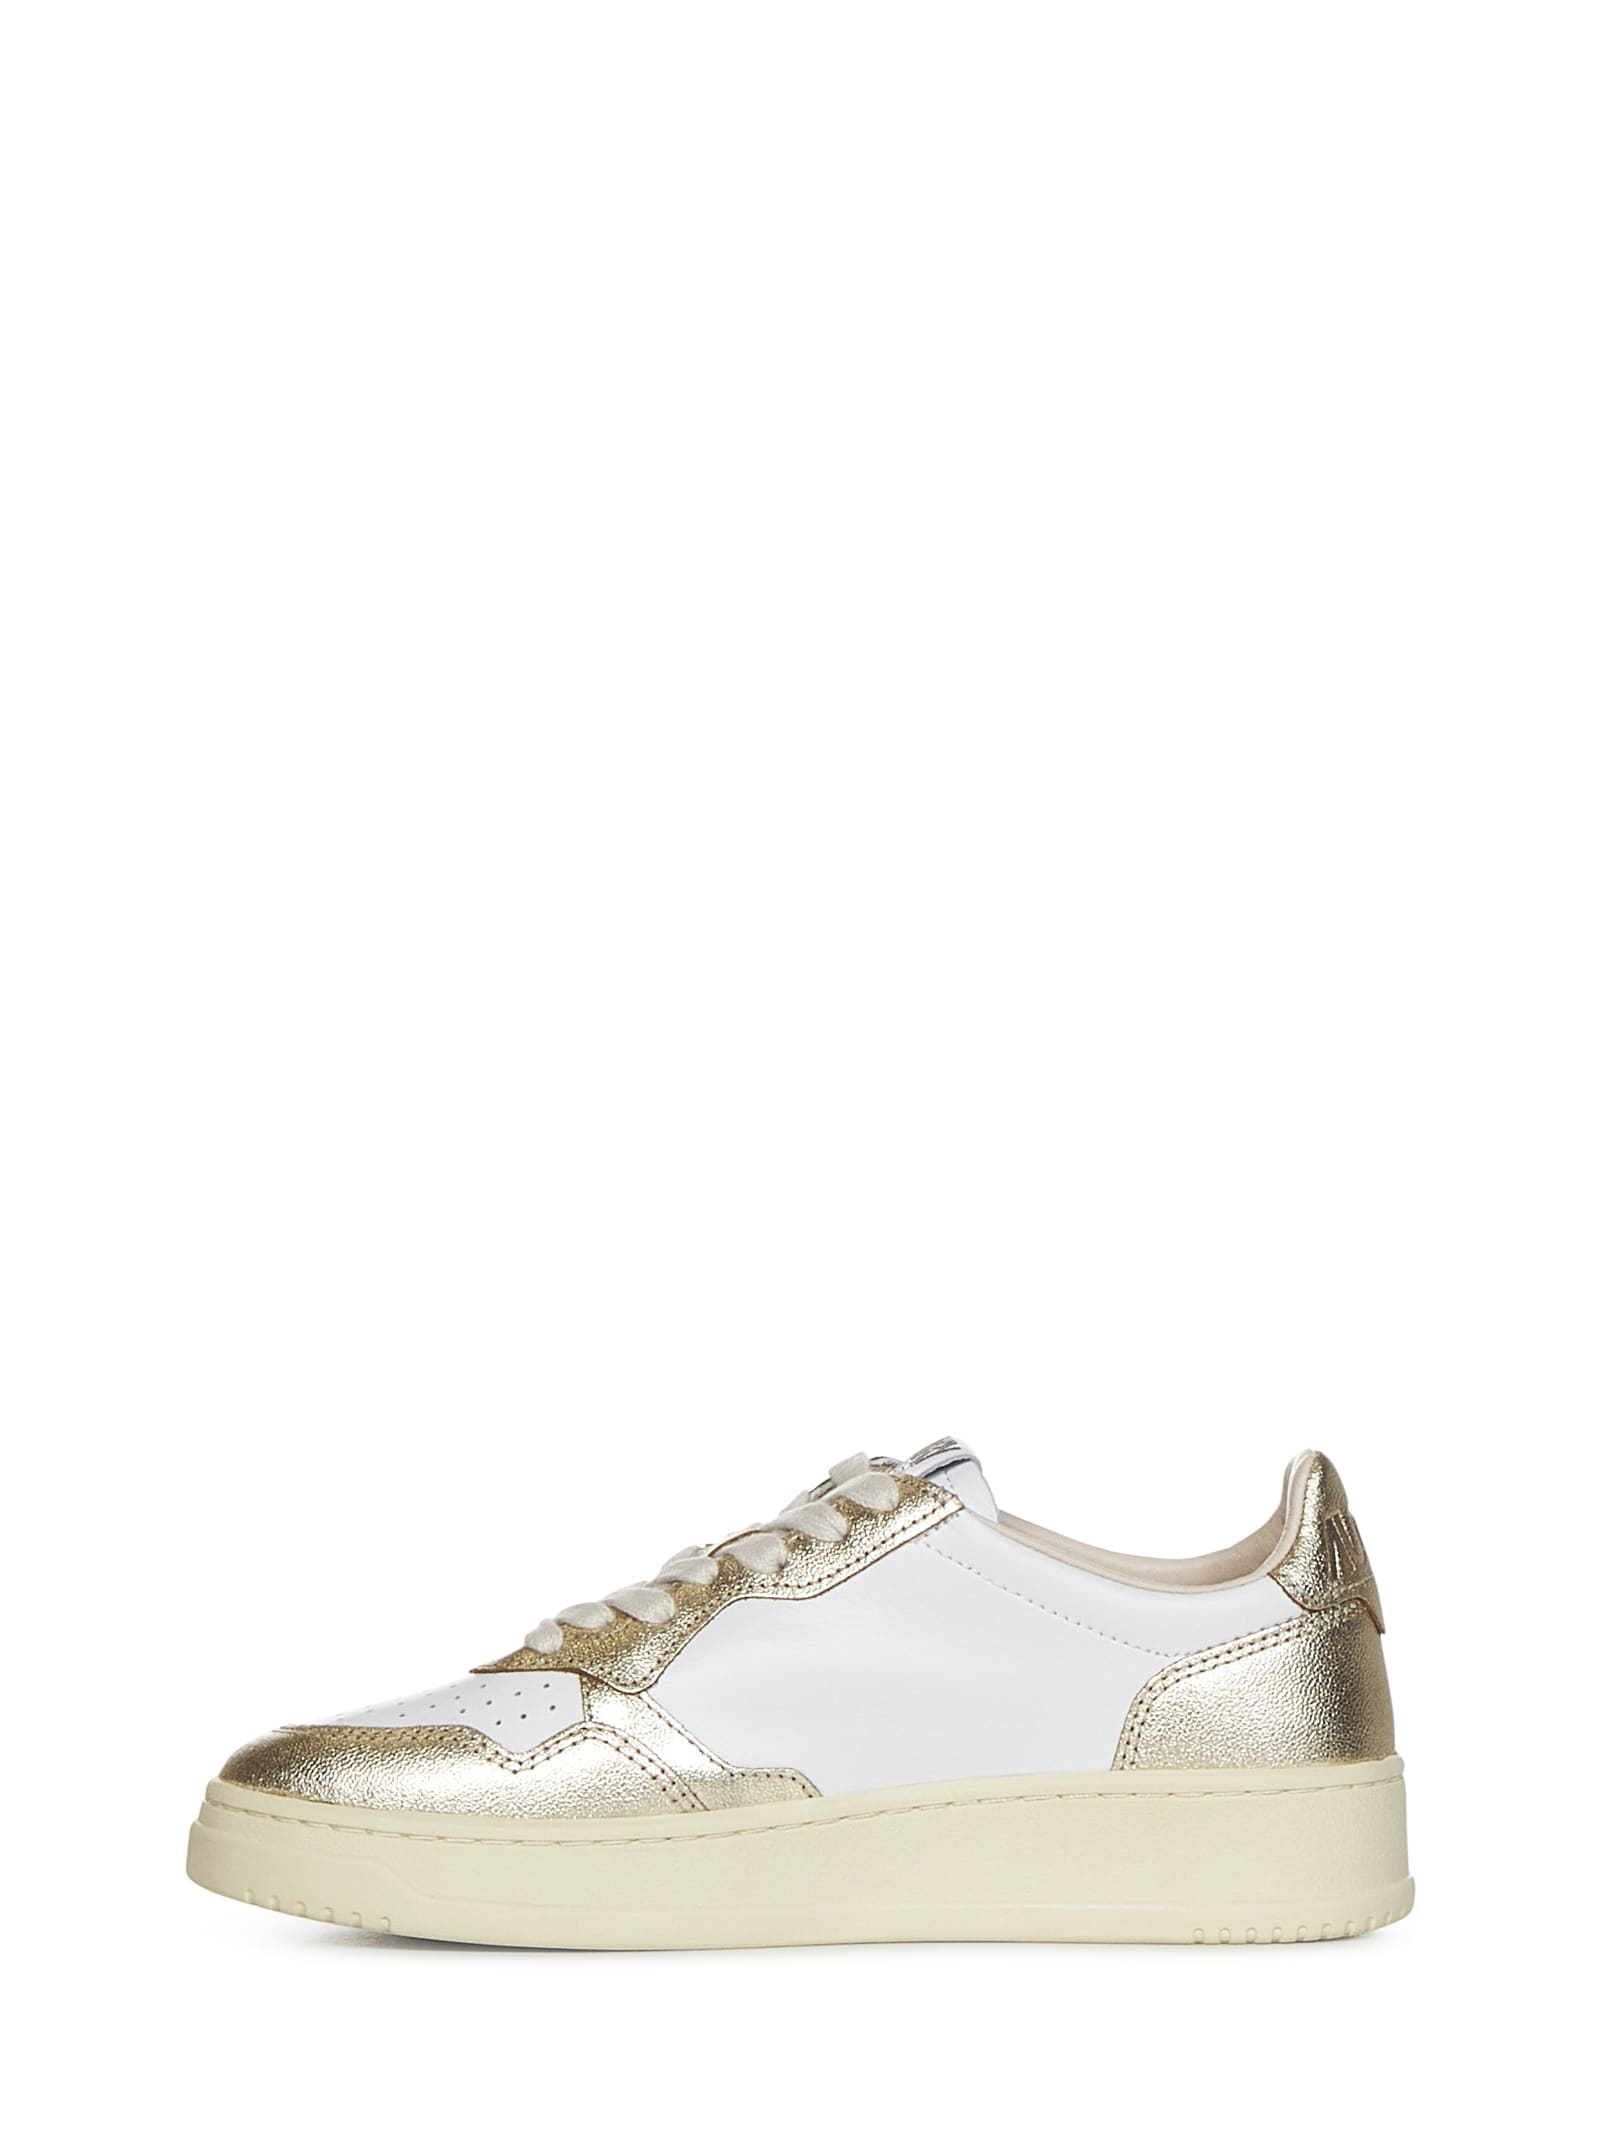 Shop Autry Medalist Low Sneakers In White Platinum